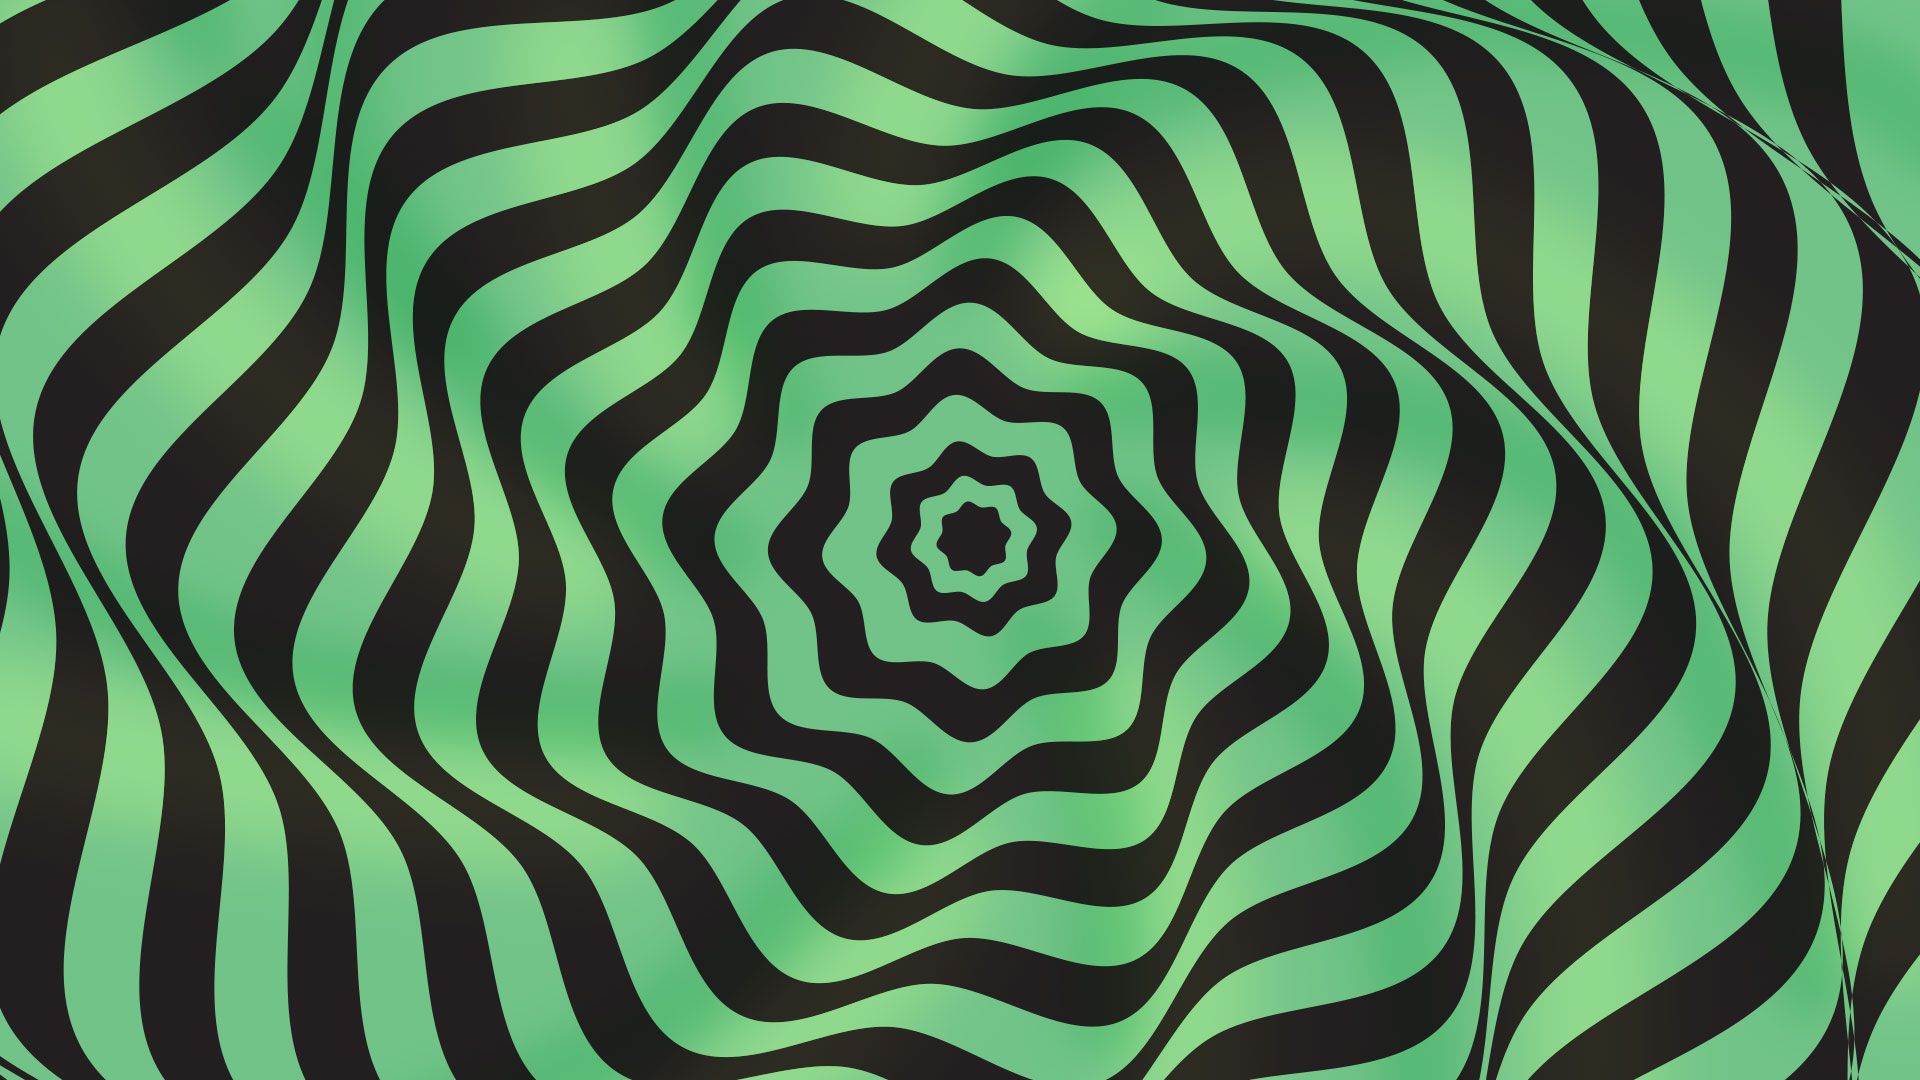 Illustration of wavy black and green lines spiraling outward in a floral shape with an optical illusion style.